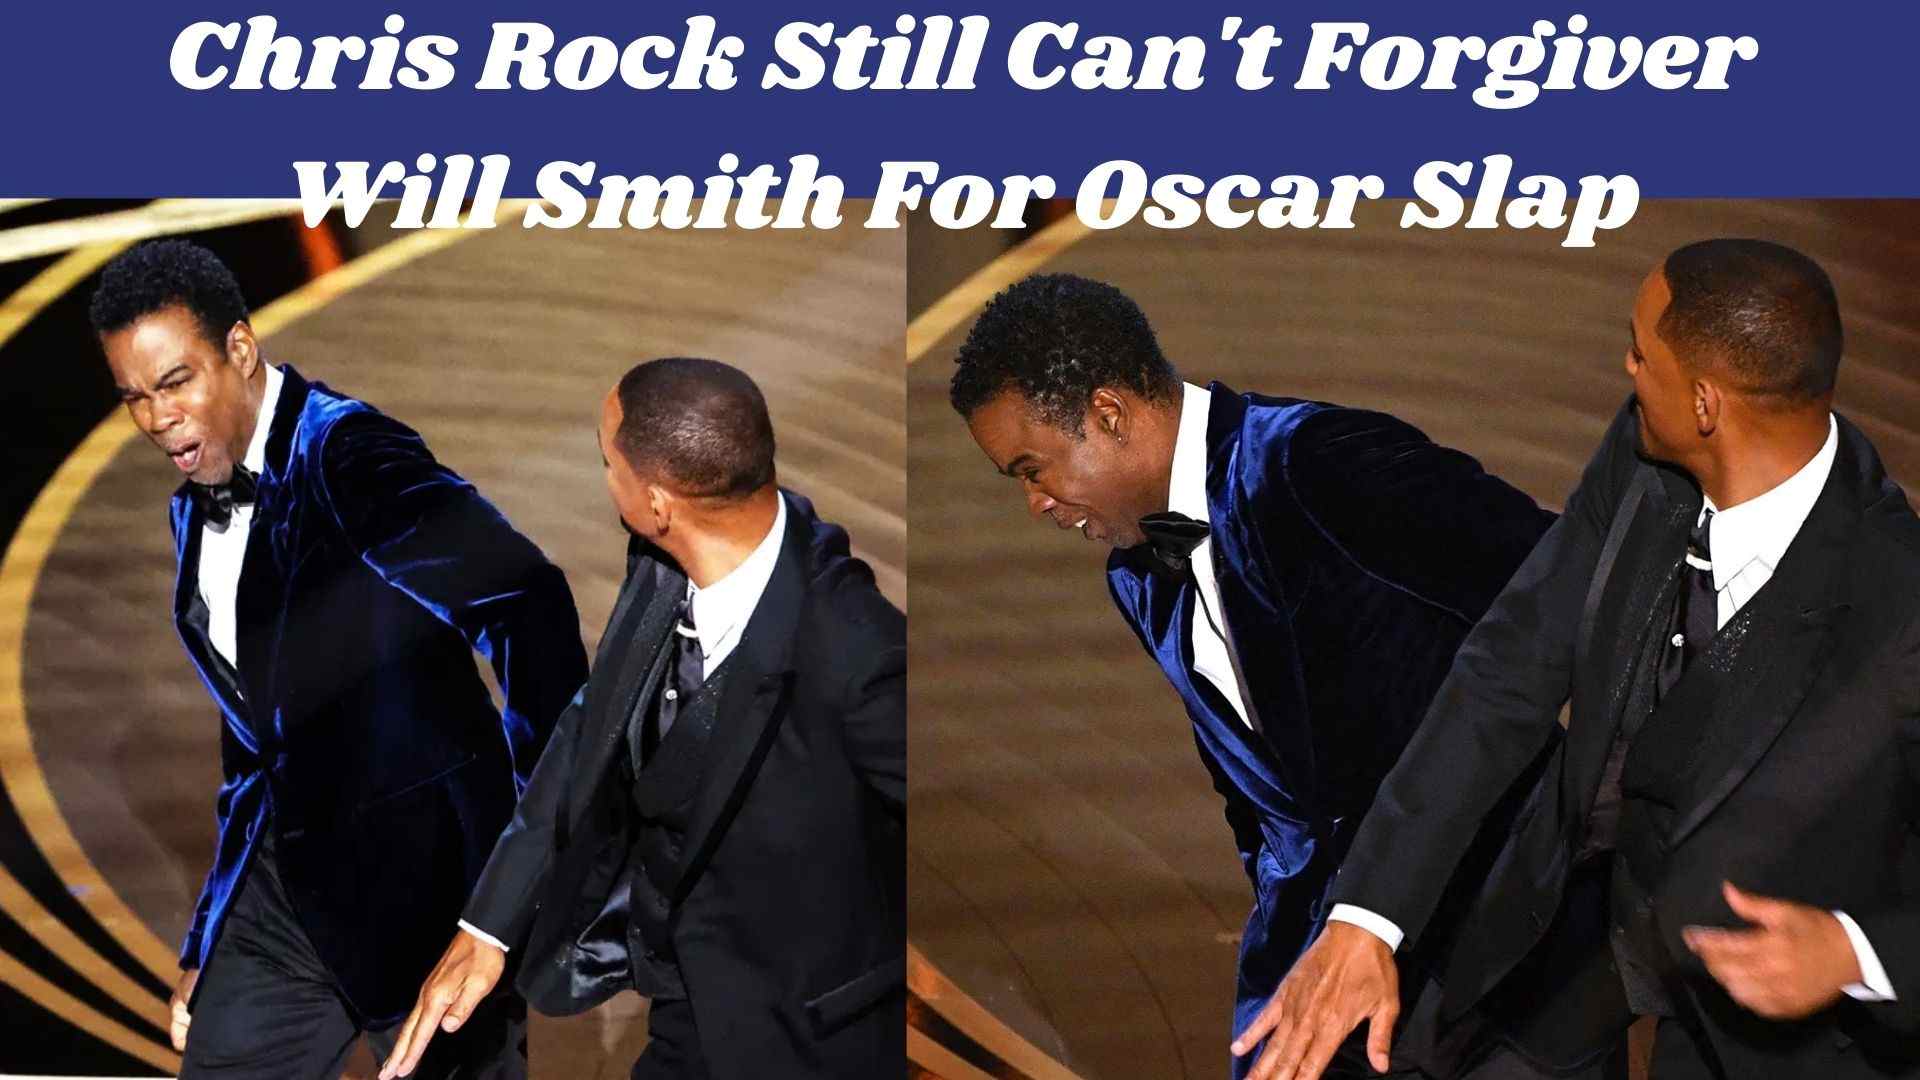 Chris Rock Still Can't Forgiver Will Smith For Oscar Slap Wallpaper and images